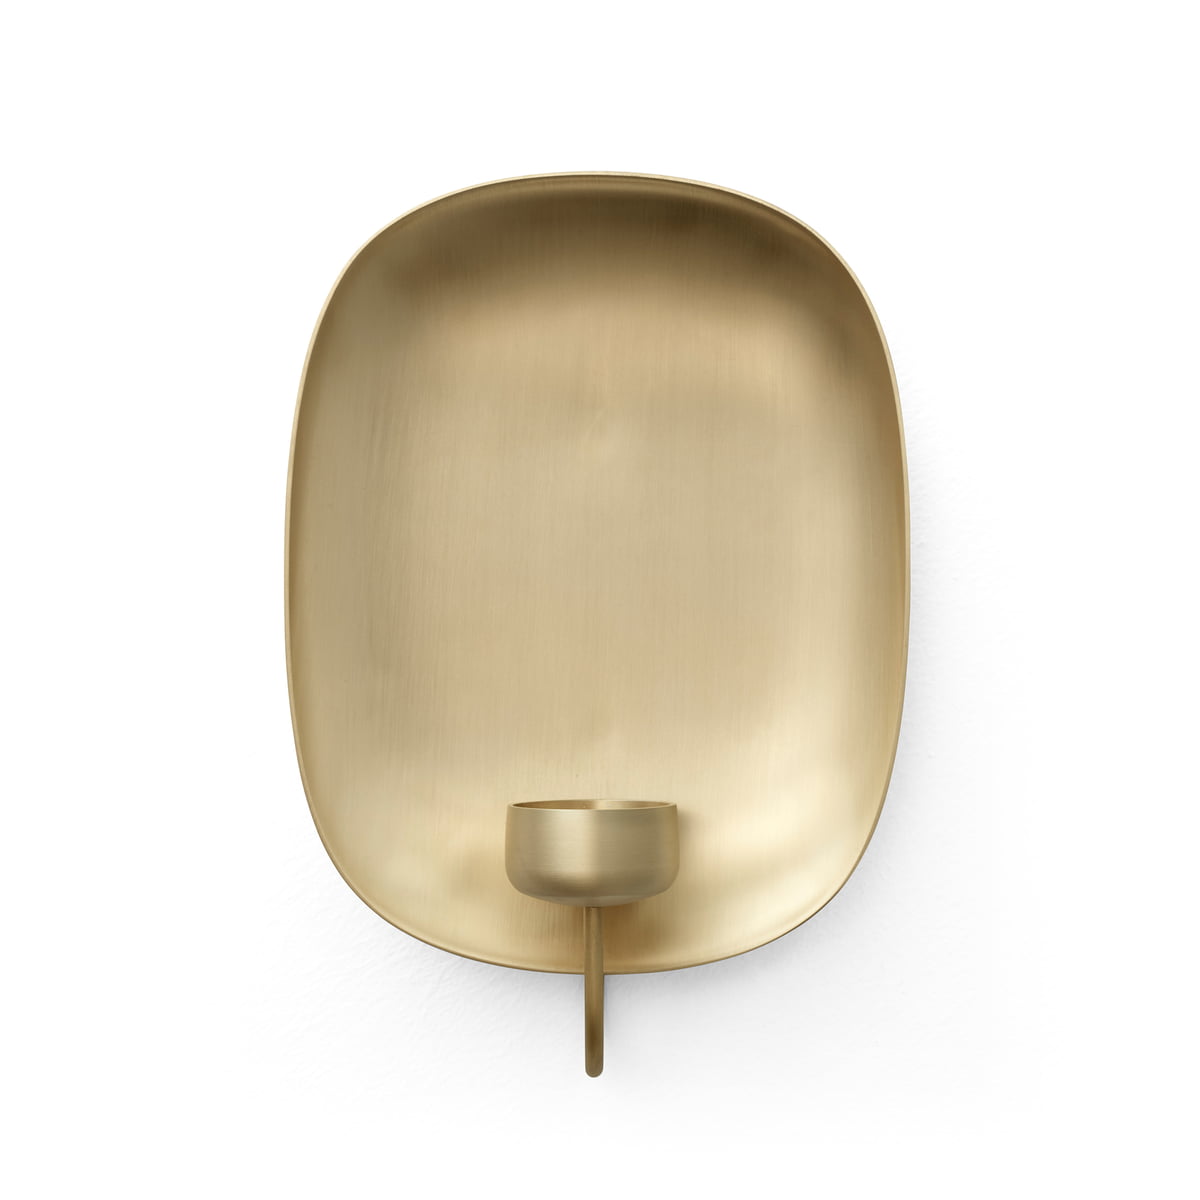 Flambeau Wall Candle Holder by Audo Copenhagen at